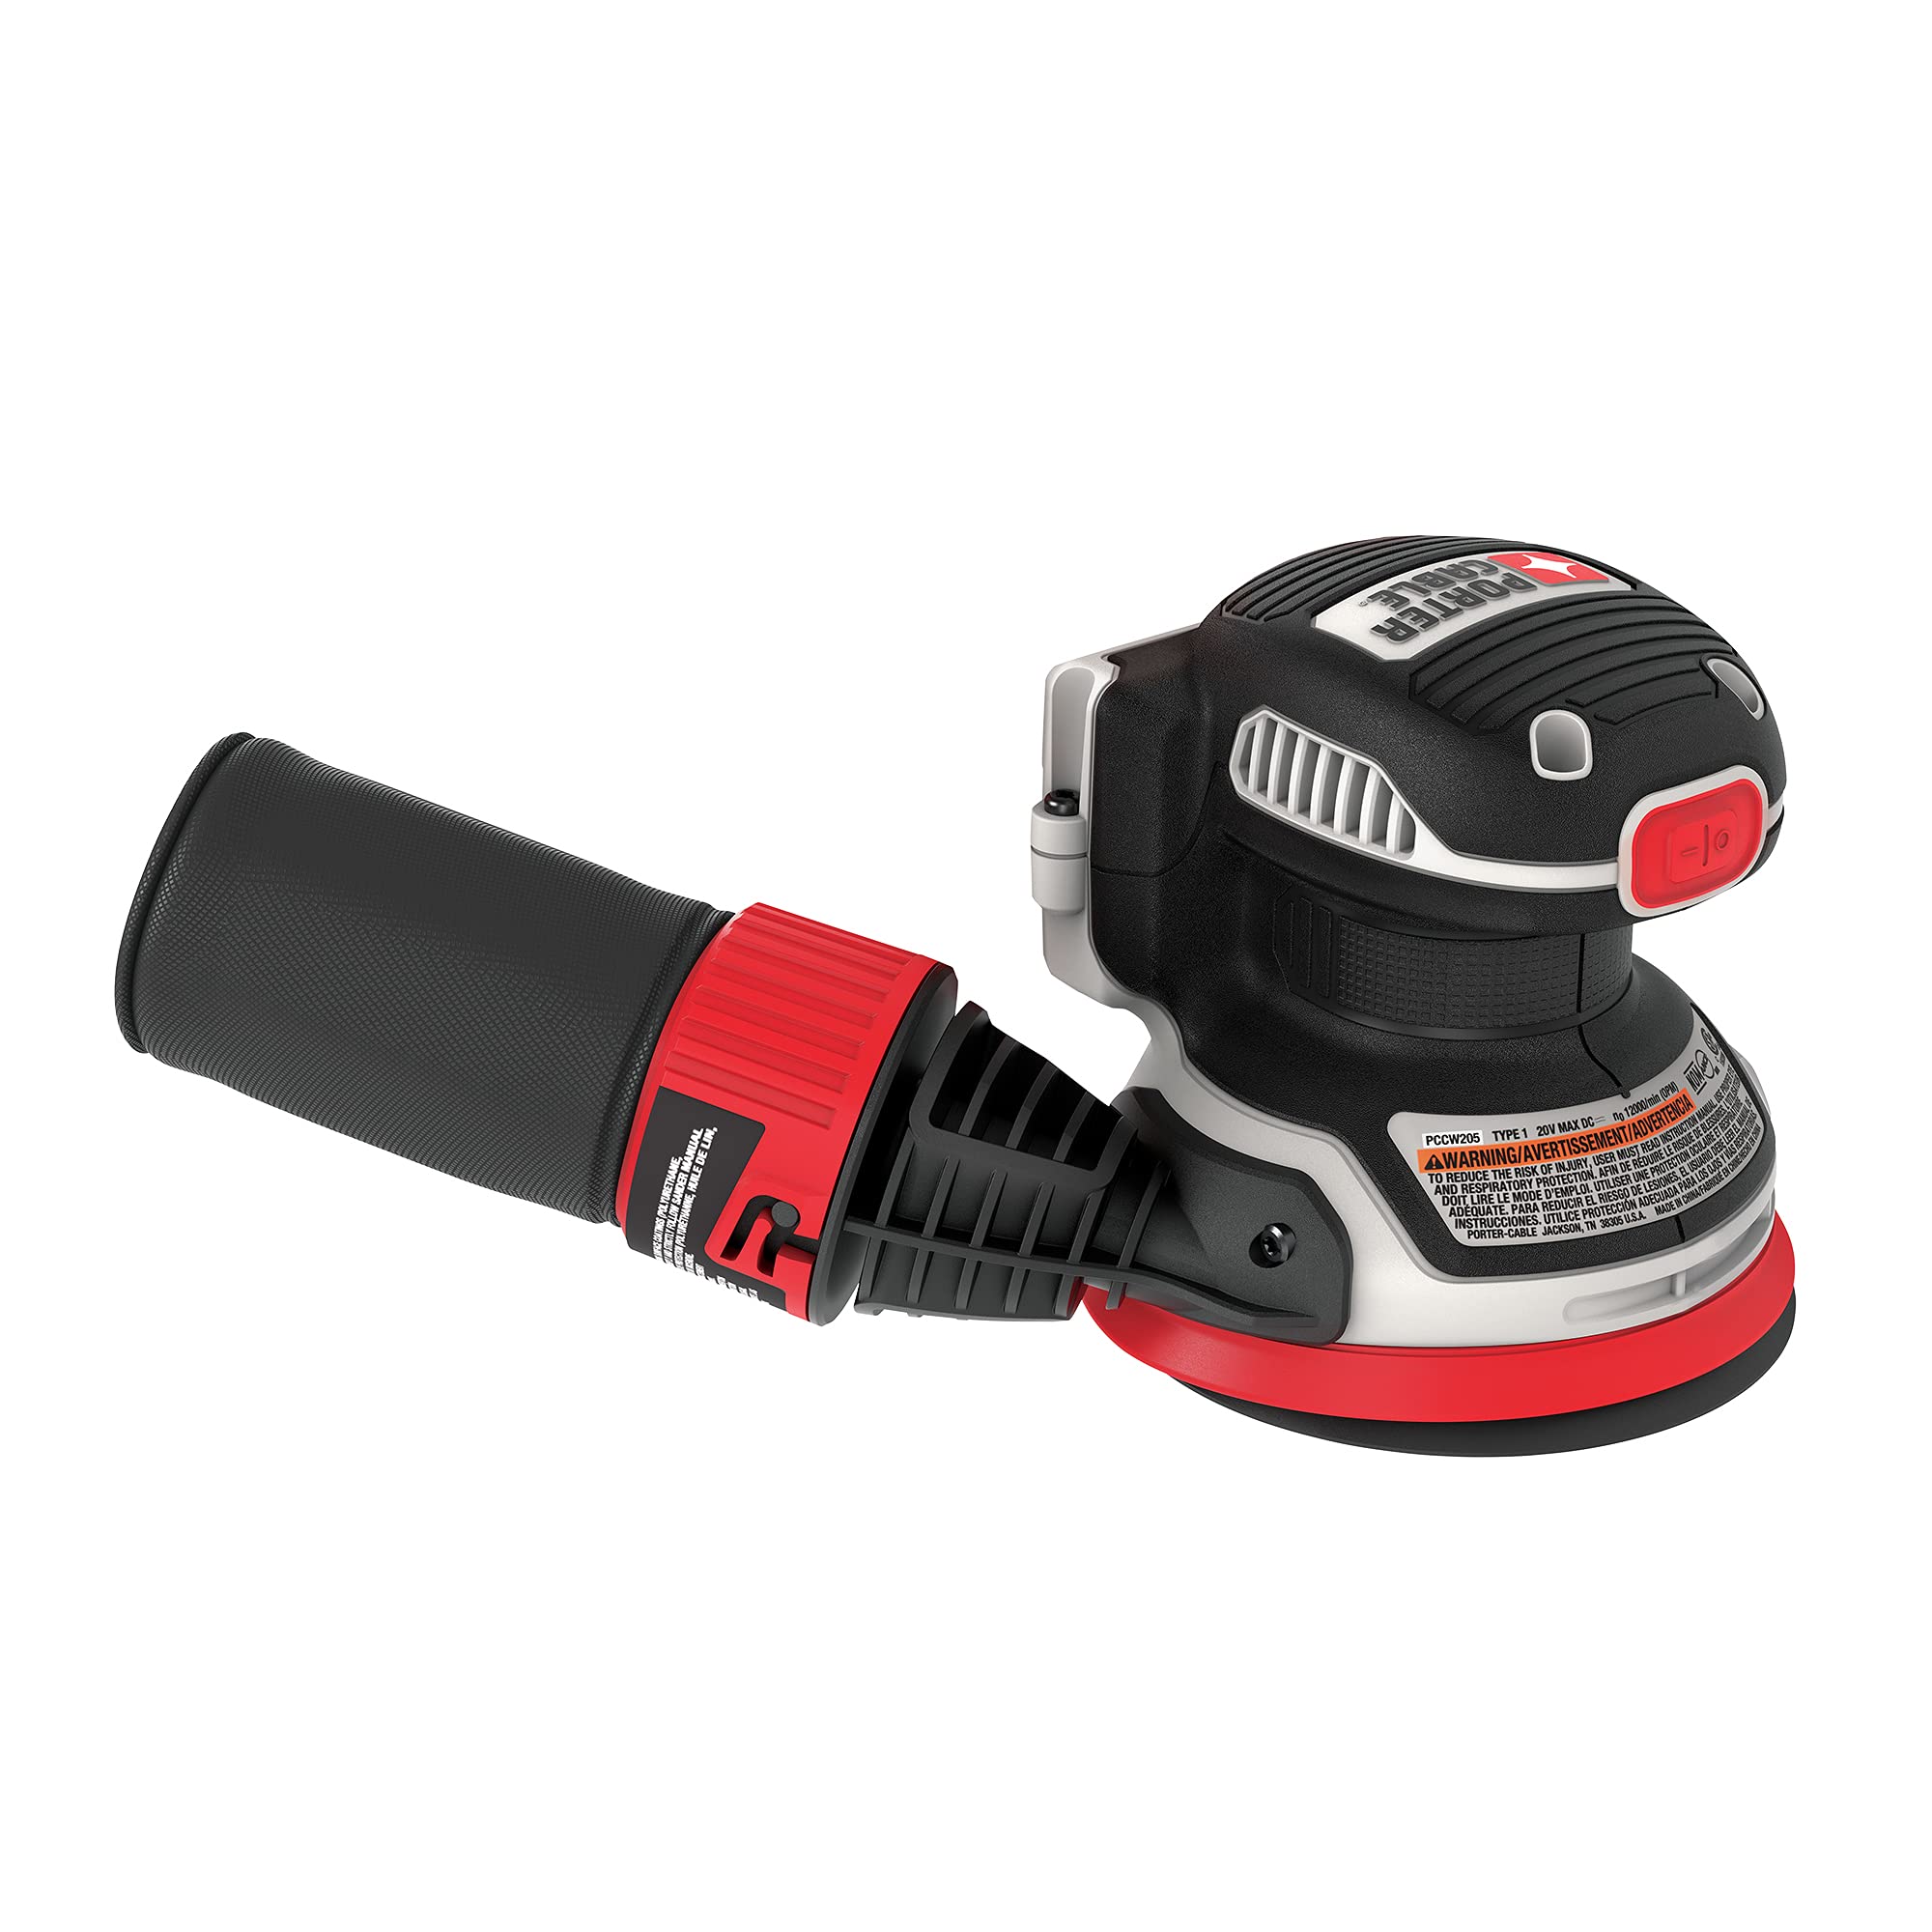 PORTER-CABLE 5" 20V Max Random Orbital Sander (Tool Only) $30 + Free Shipping w/ Prime or on $35+